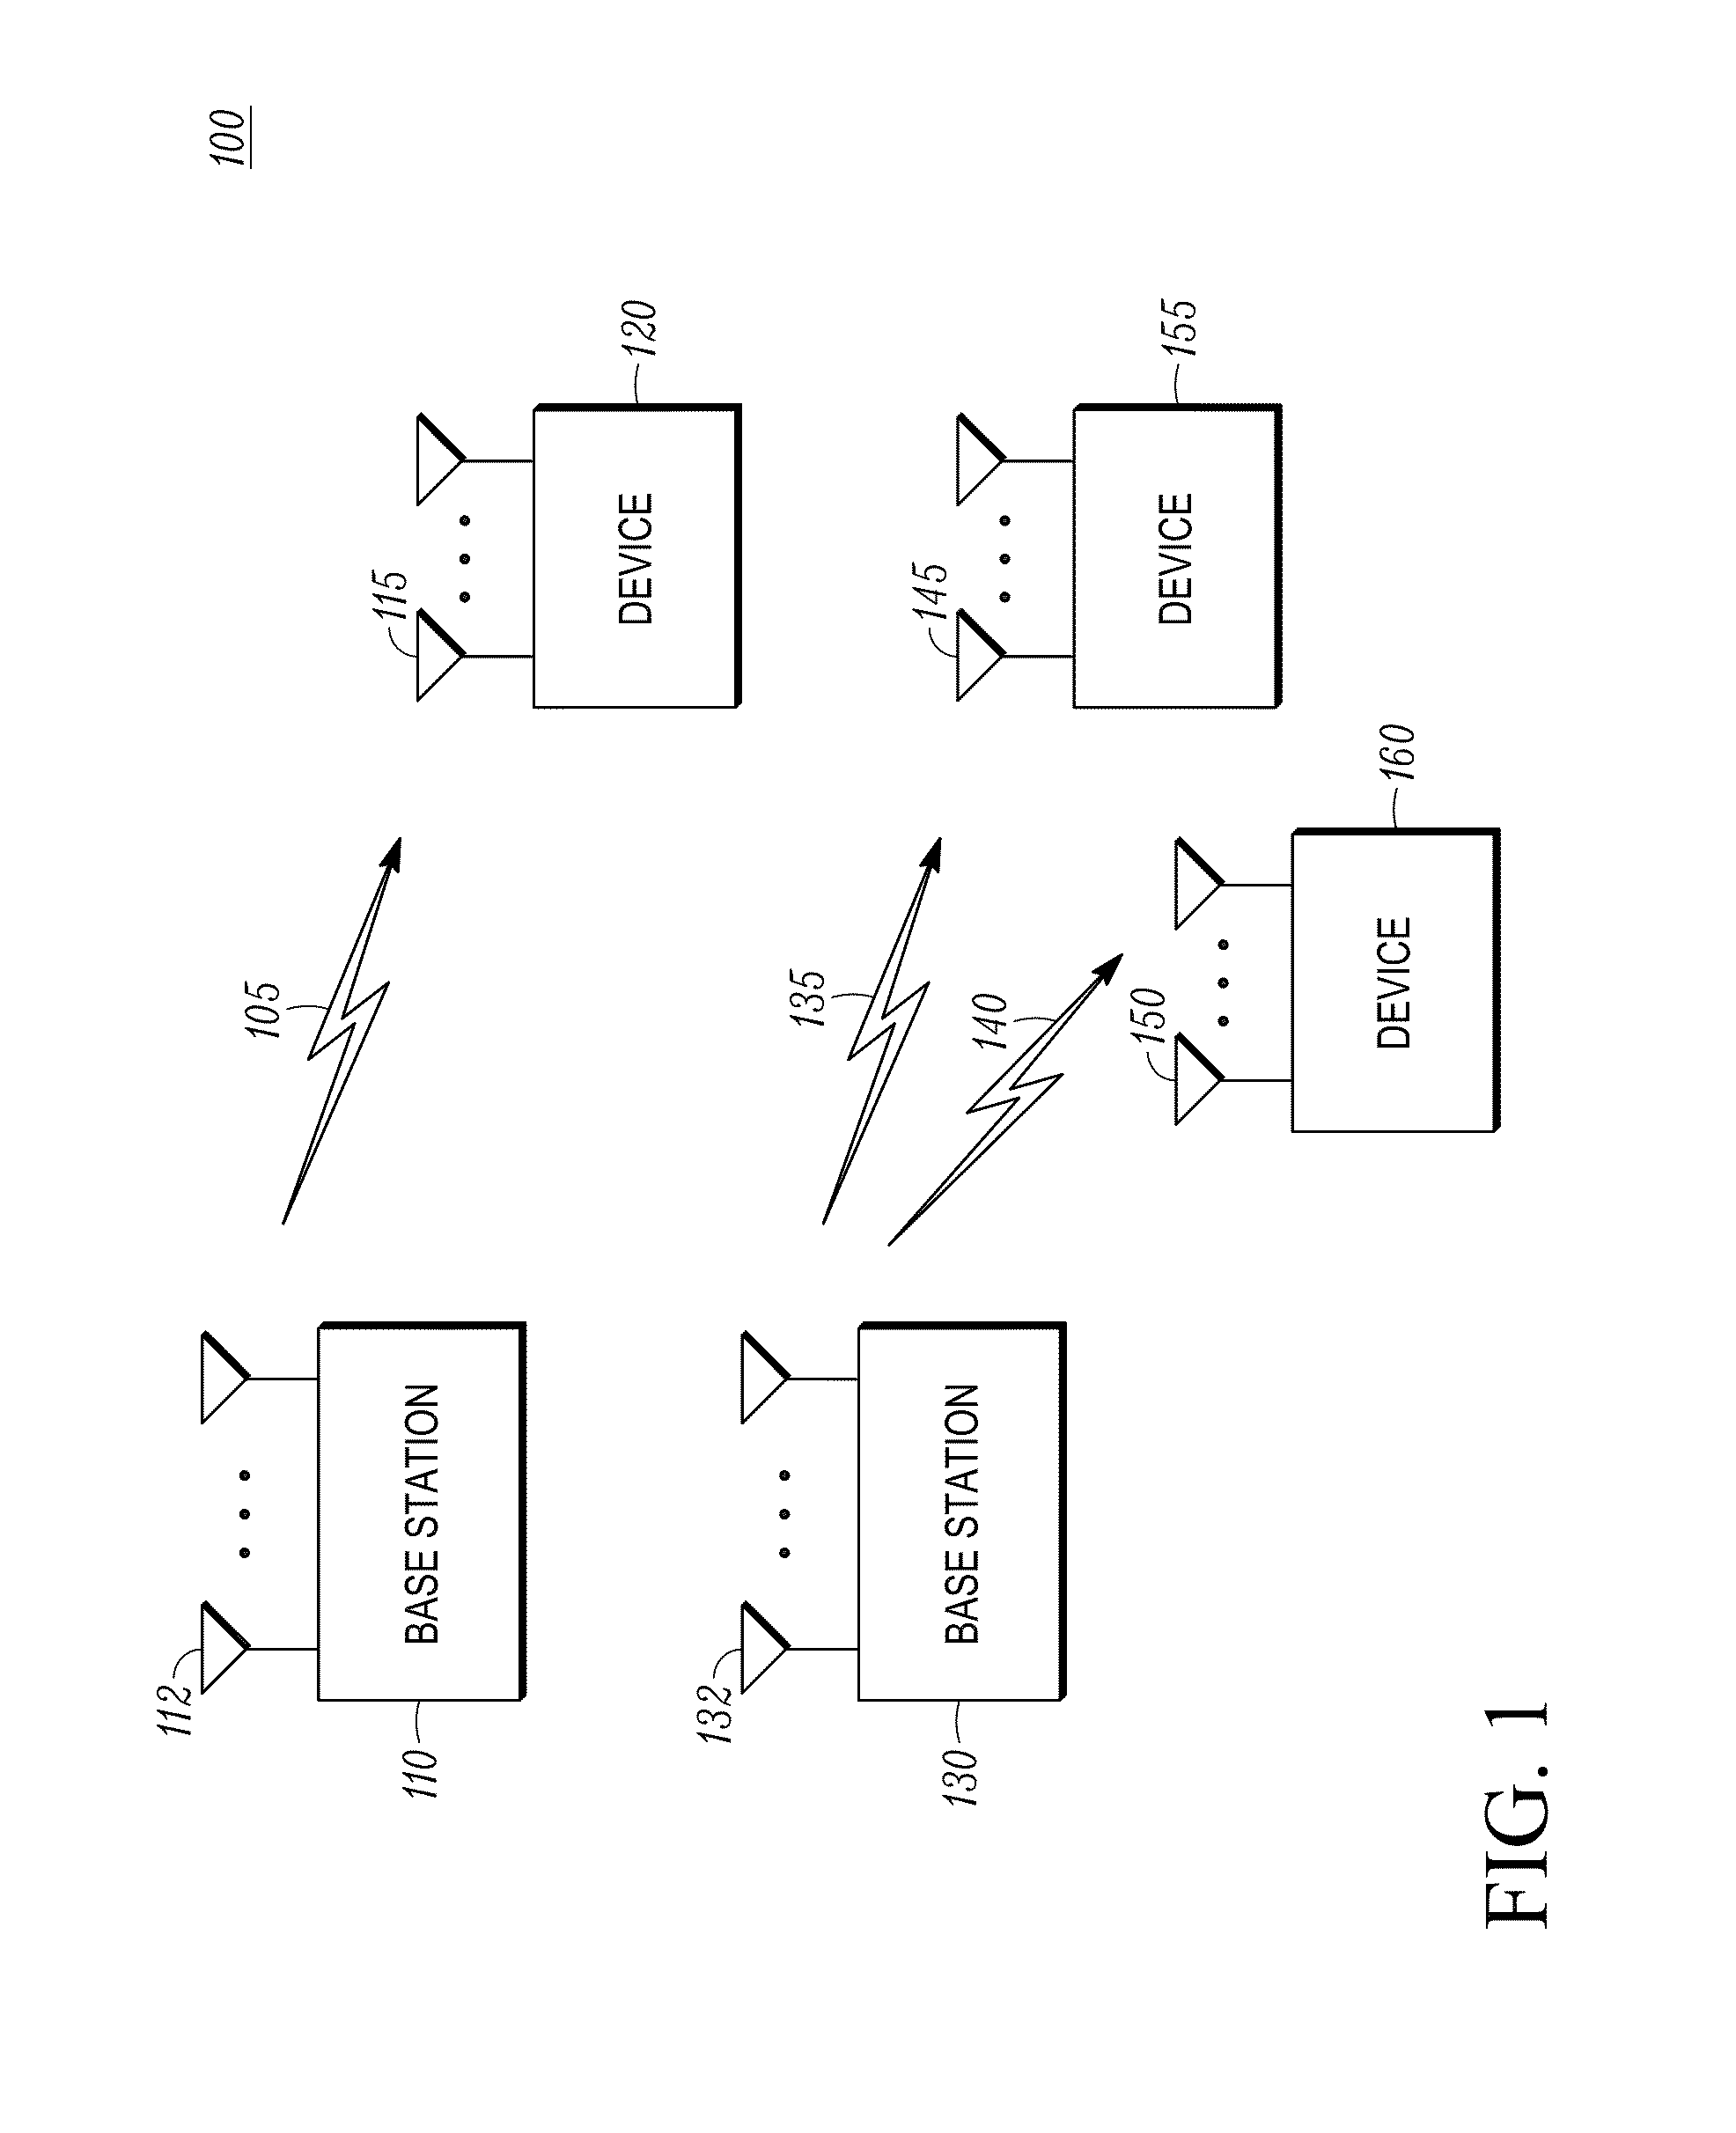 Method for channel quality feedback in wireless communication systems